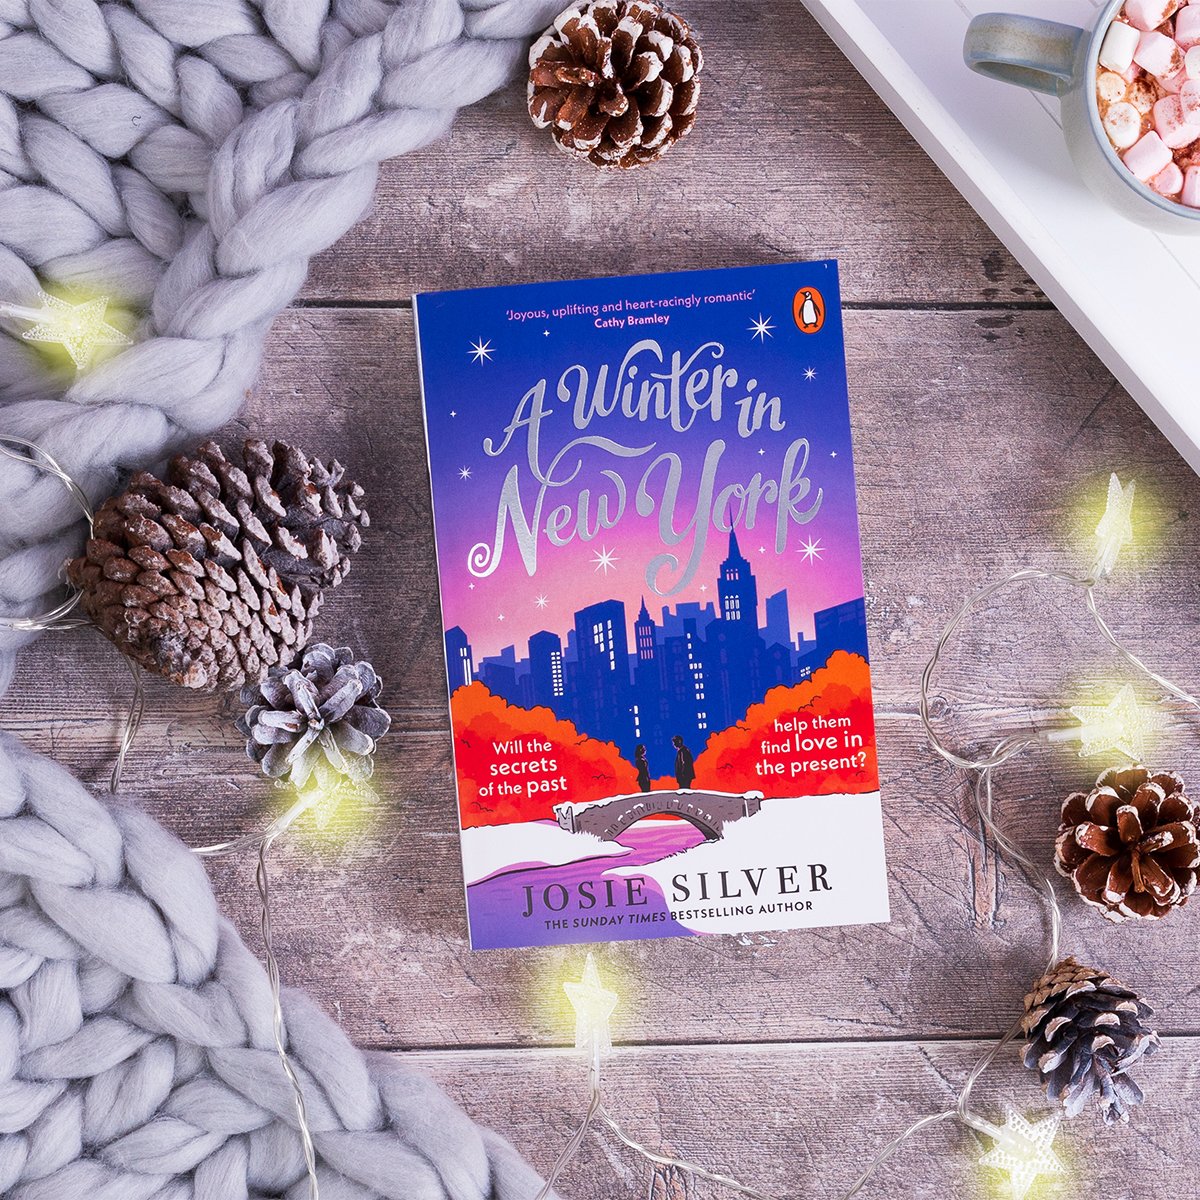 Happy Book Birthday to this wonderful joy of a novel ❤️✨❄️ I've had the utter joy of working with @JosieSilver_ since #OneDayinDecember & all her novels are completely brilliant. Her newest #AWinterinNewYork is no exception. It will give you ALL the feels